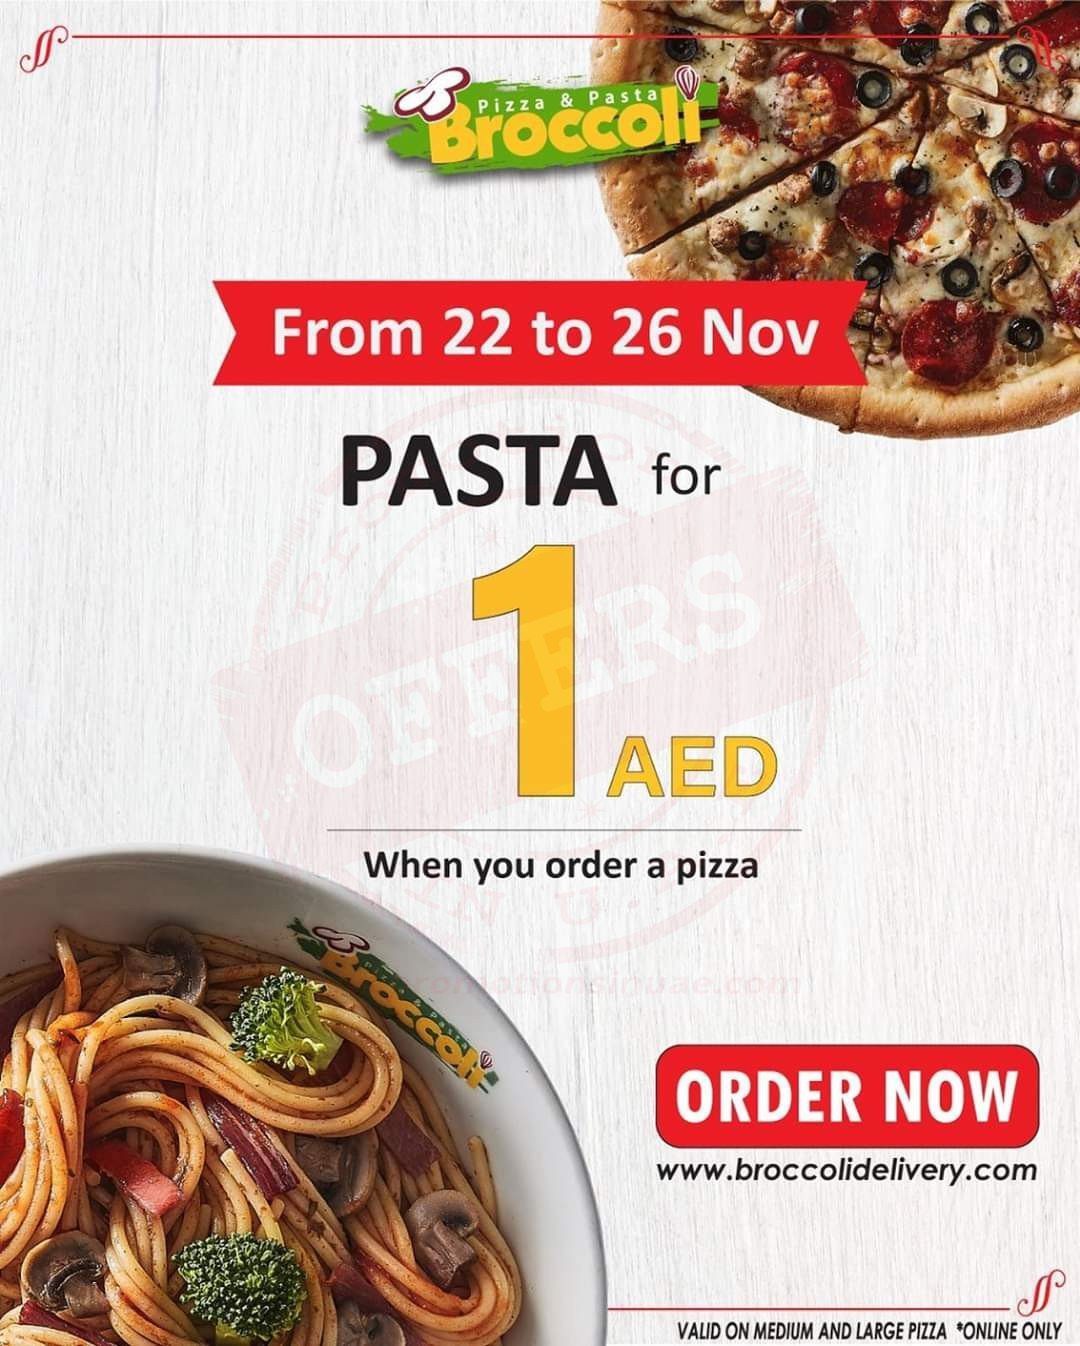 FB IMG 1574353737789 Buy 1 pizza, and get one pasta for AED 1 ONLY. Broccoli Pizza and Pasta